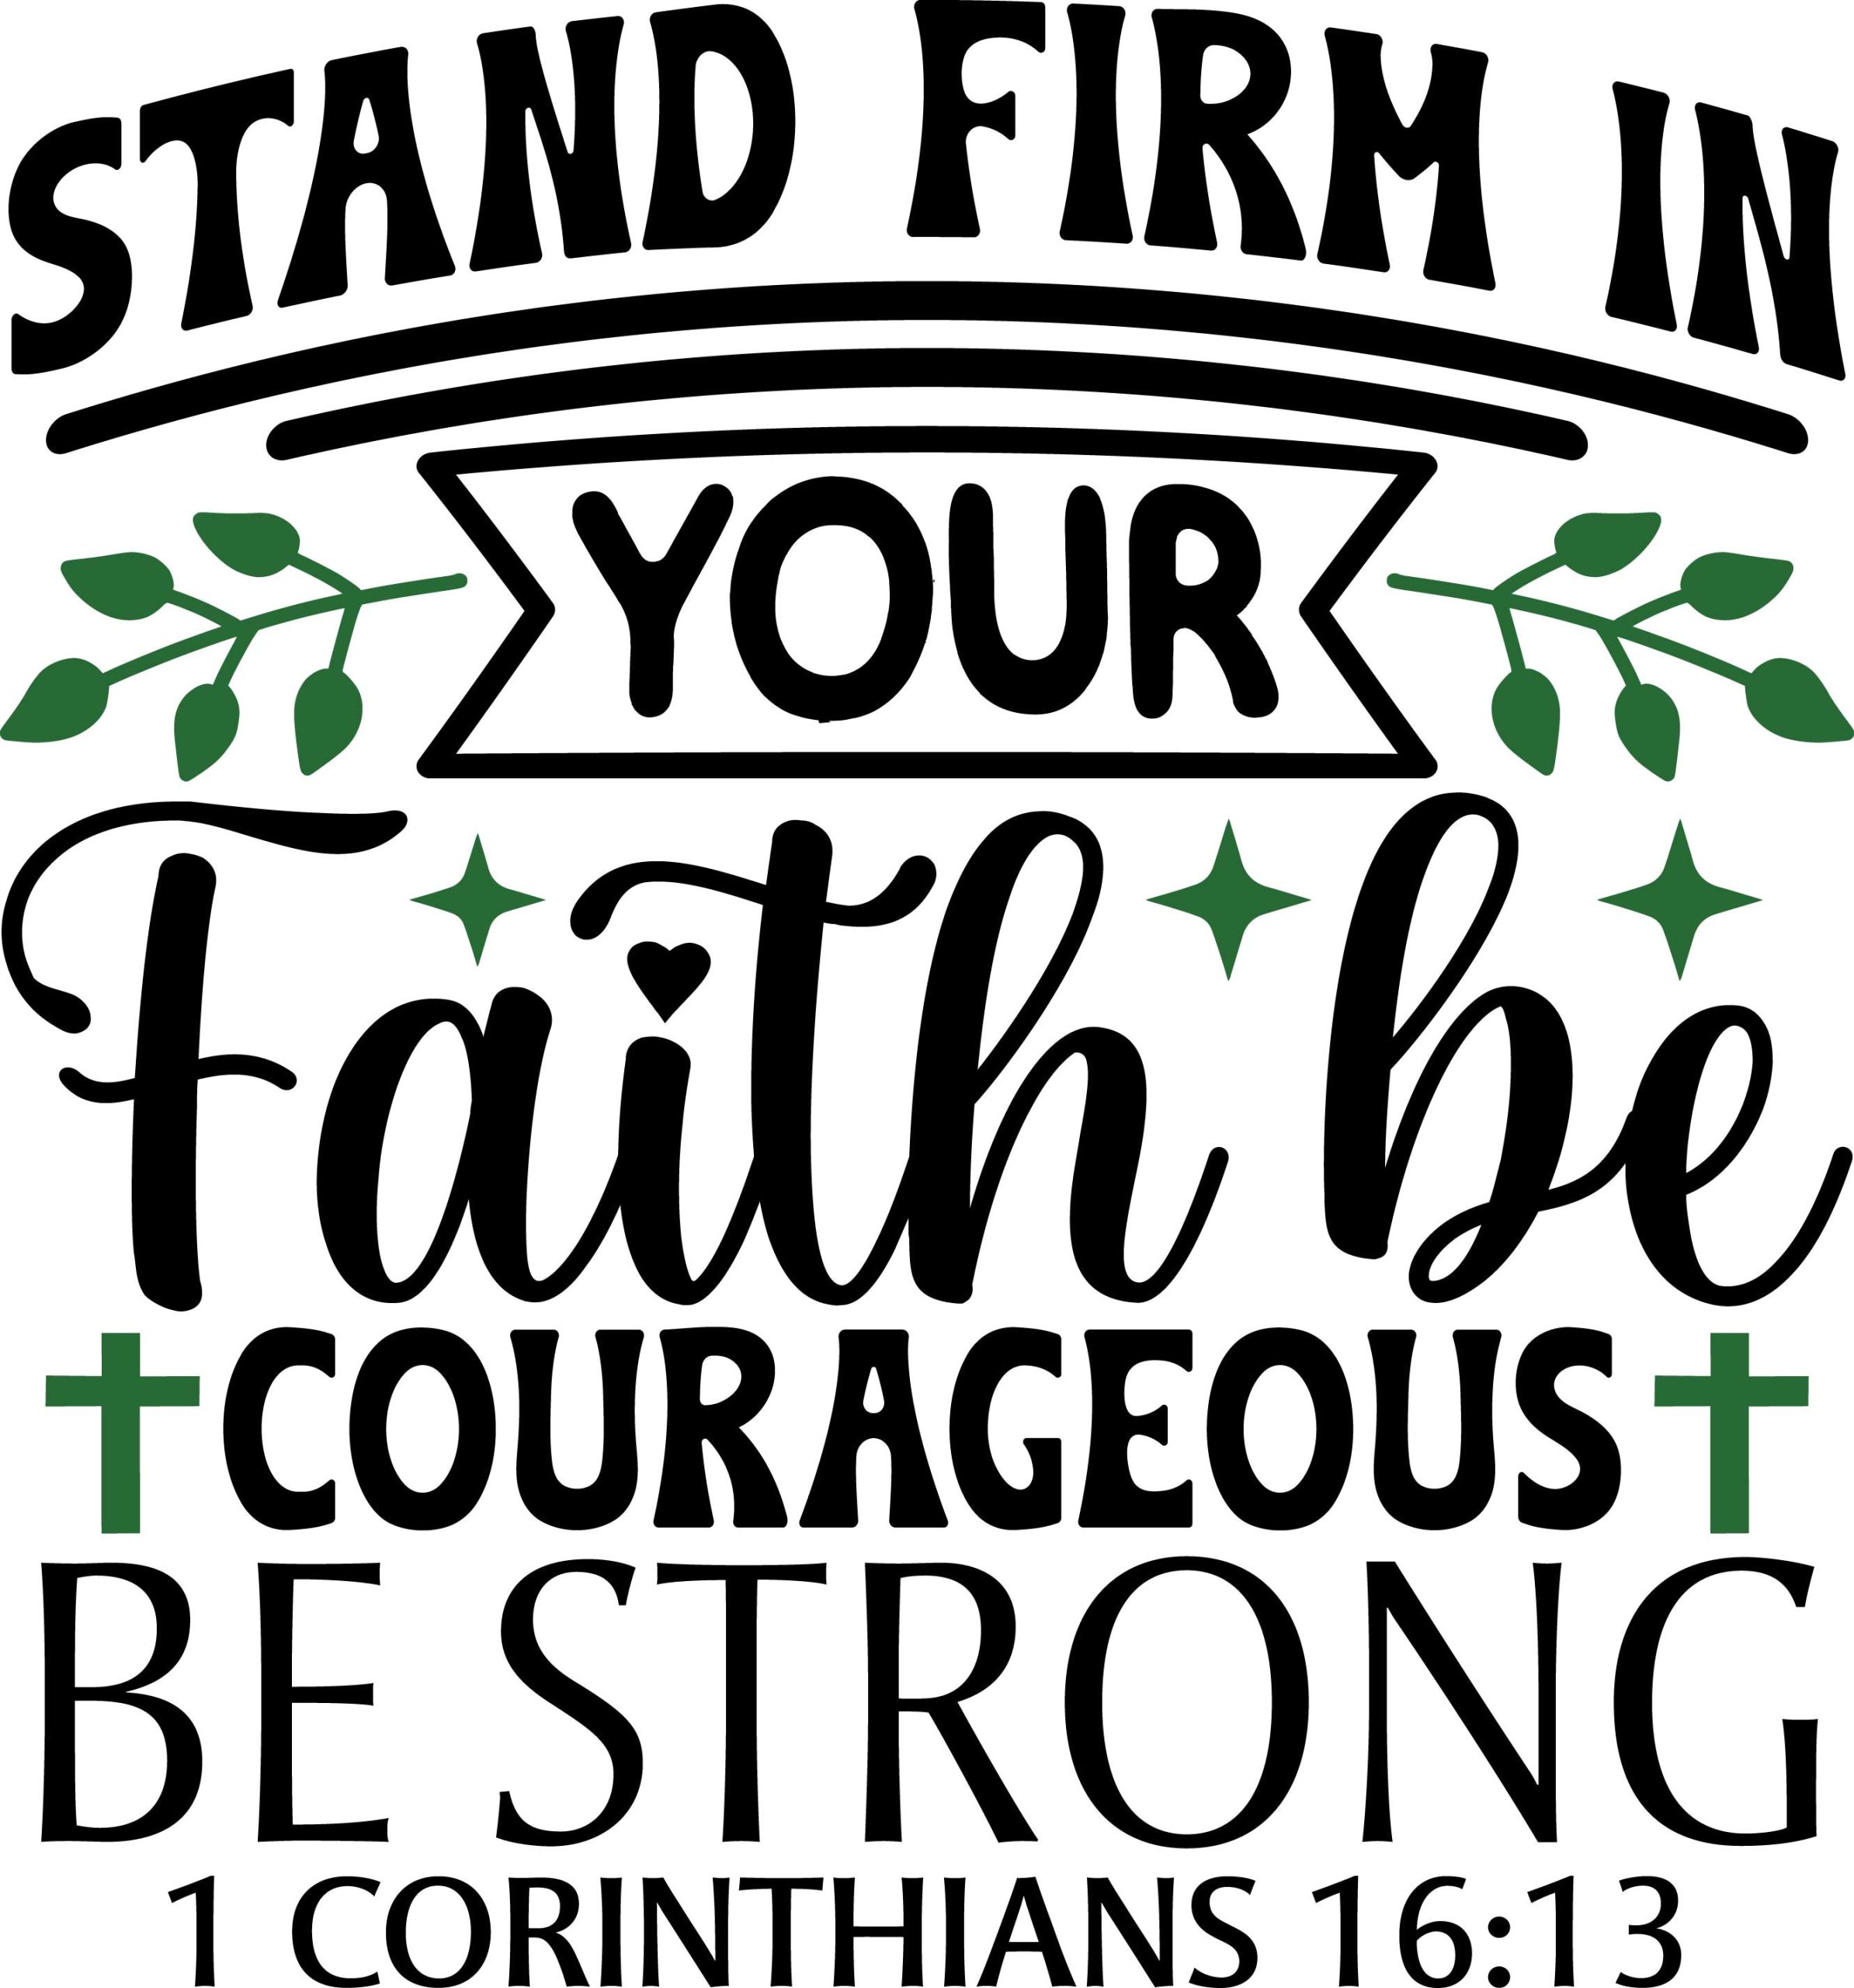 Stand firm in your faith be courageous be strong 1 Corinthians 16:11, bible verses, scripture verses, svg files, passages, sayings, cricut designs, silhouette, embroidery, bundle, free cut files, design space, vector